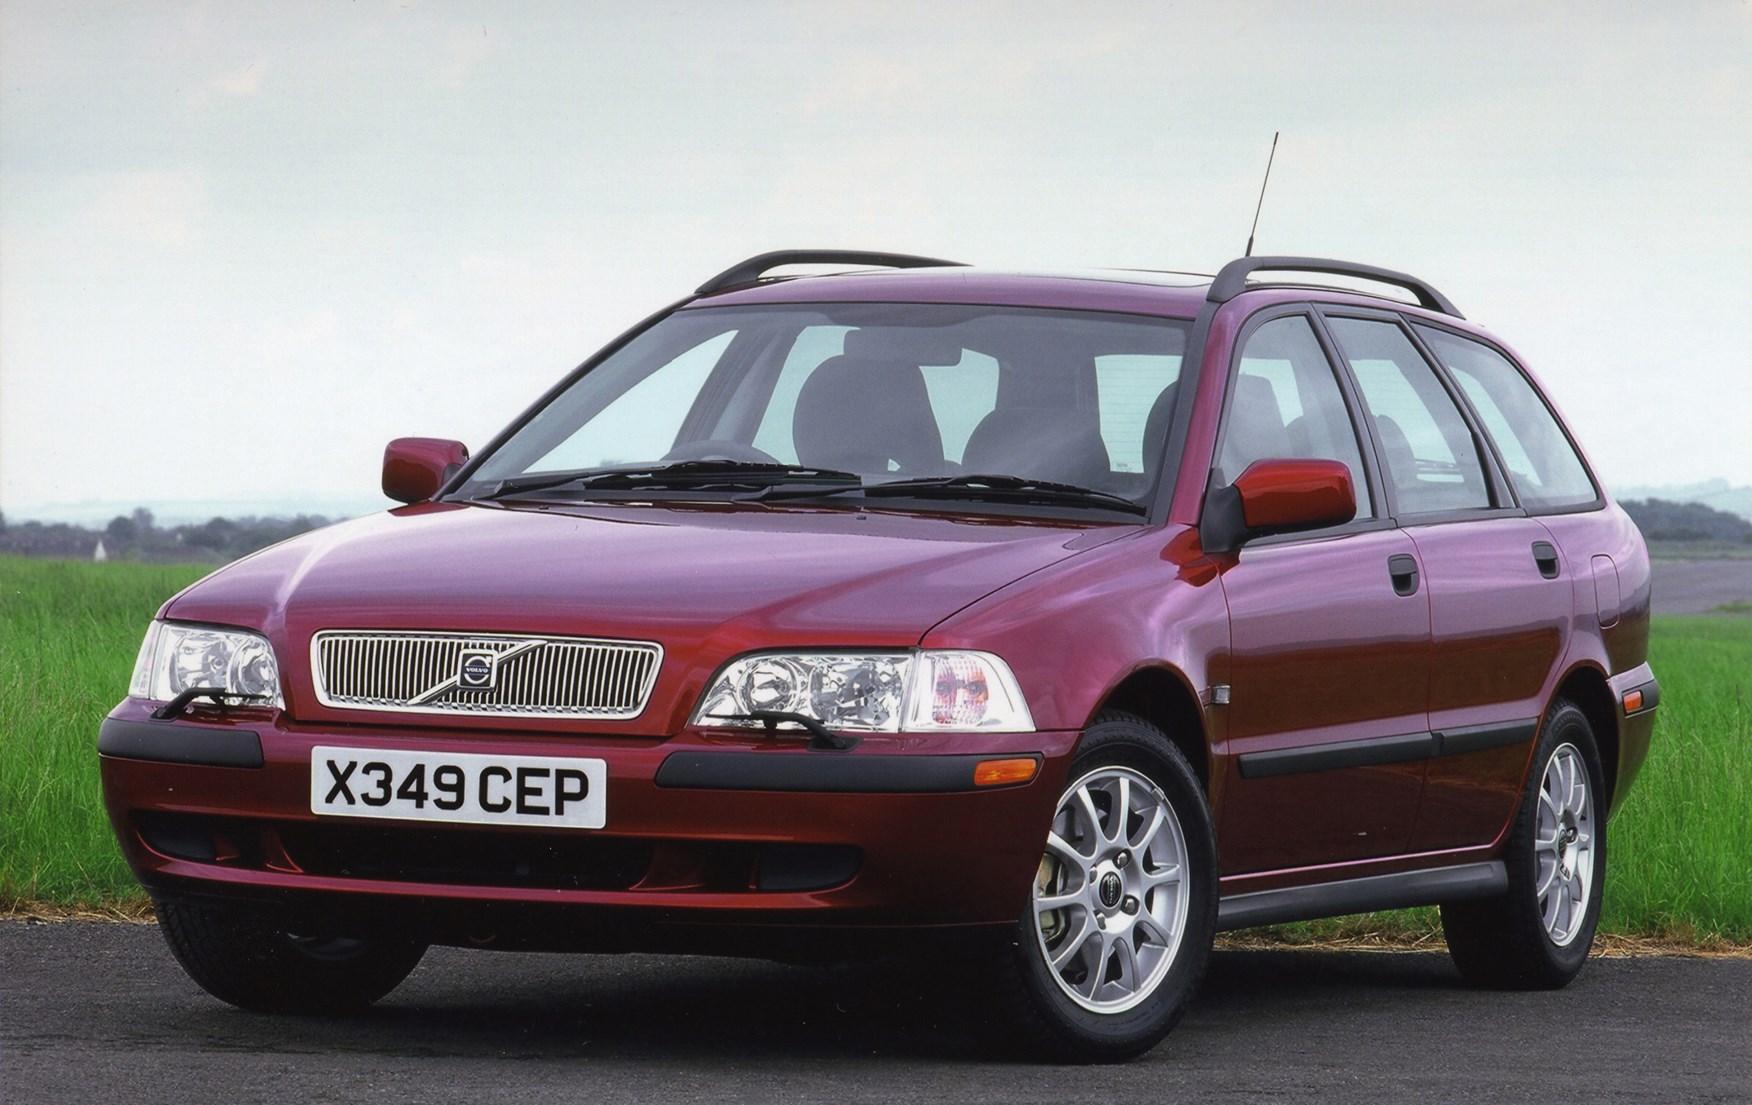 Used Volvo V40 (1996 - 2004) Practicality | Parkers